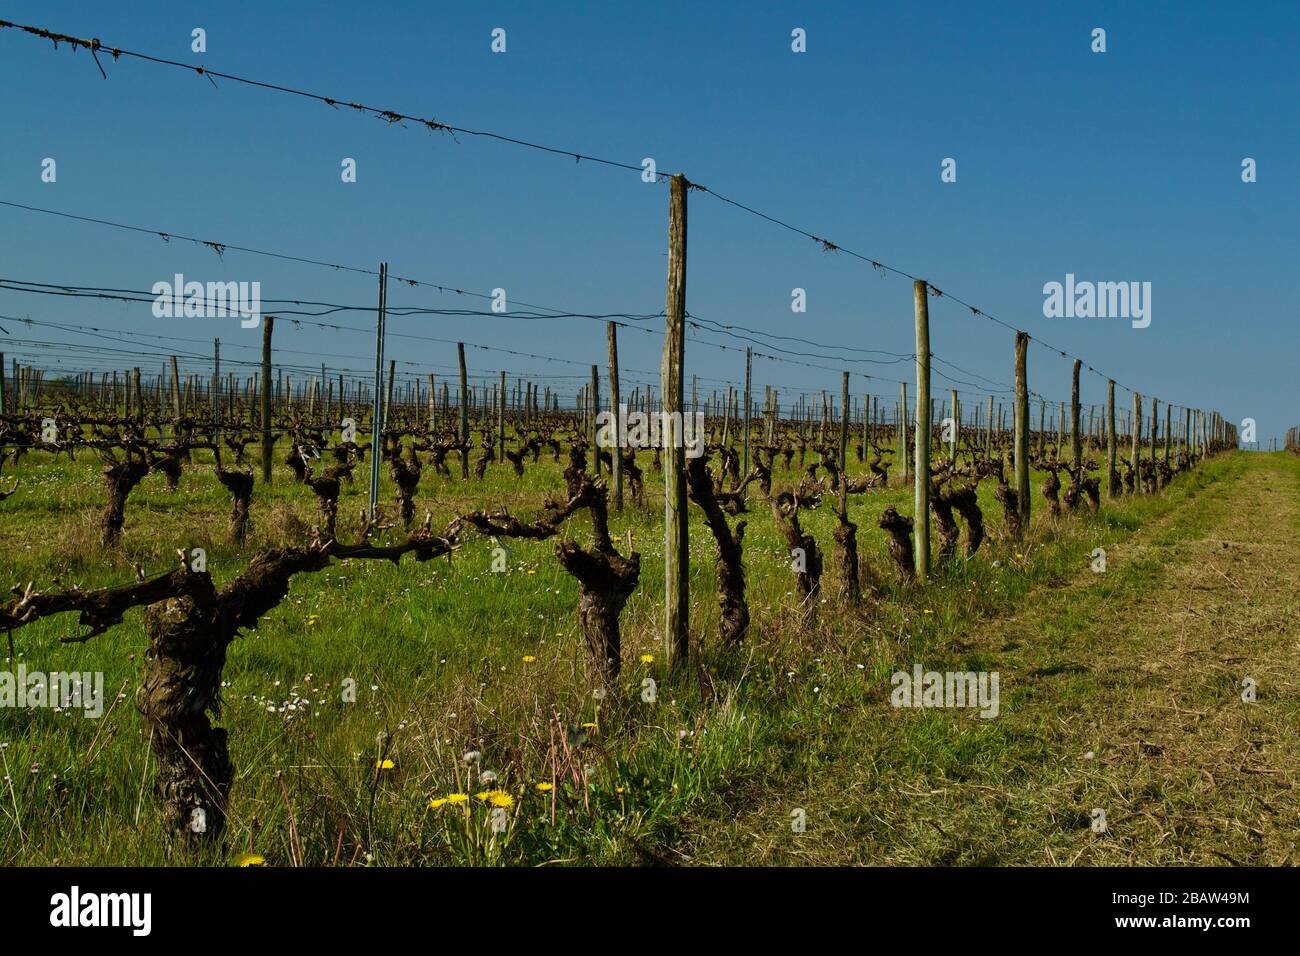 Vines budding in the early spring in the Cotes de Duras AOC, Lot-et-Garonne, France Stock Photo